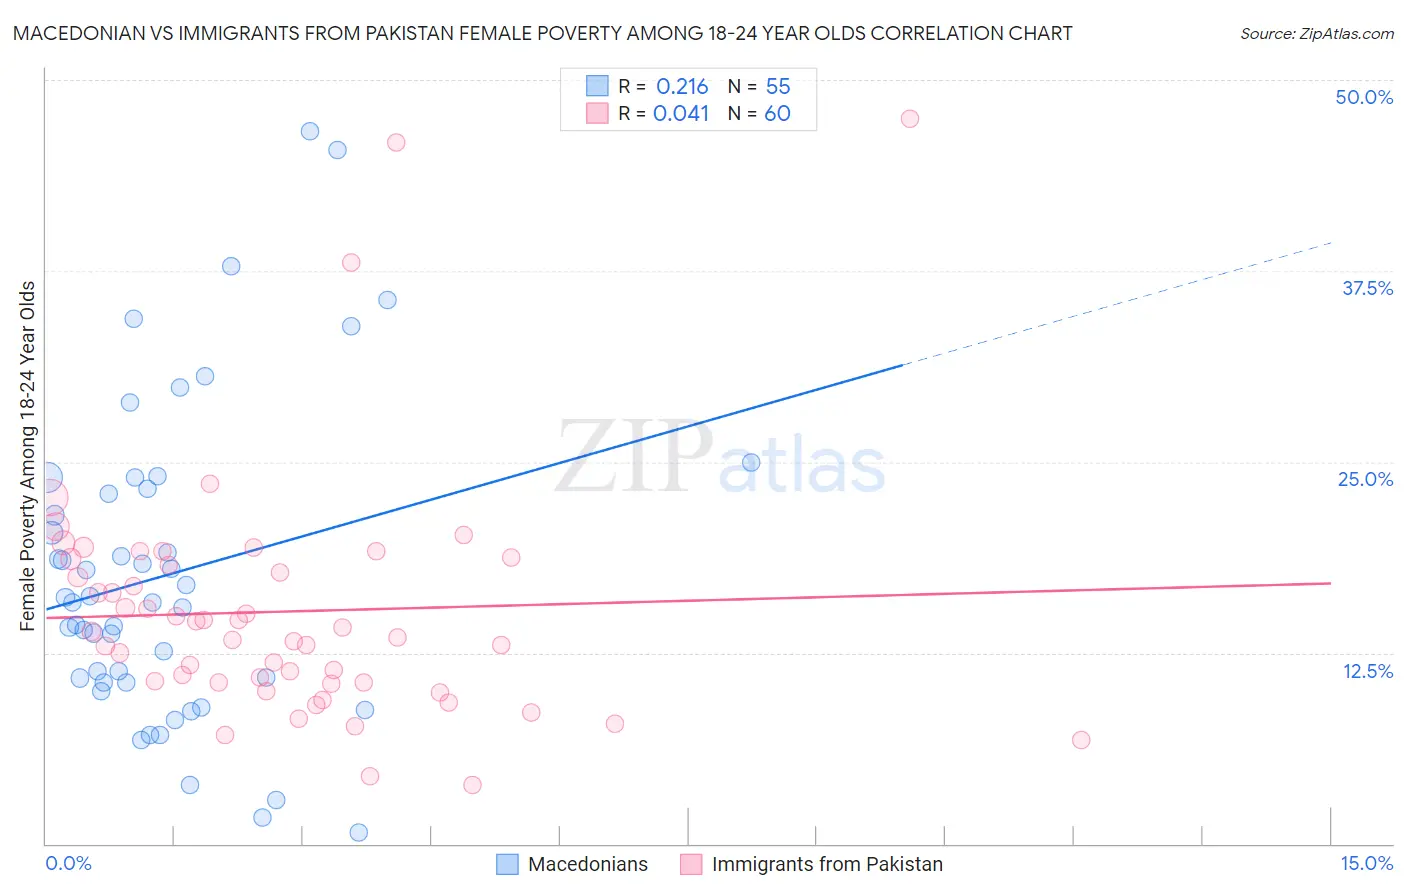 Macedonian vs Immigrants from Pakistan Female Poverty Among 18-24 Year Olds